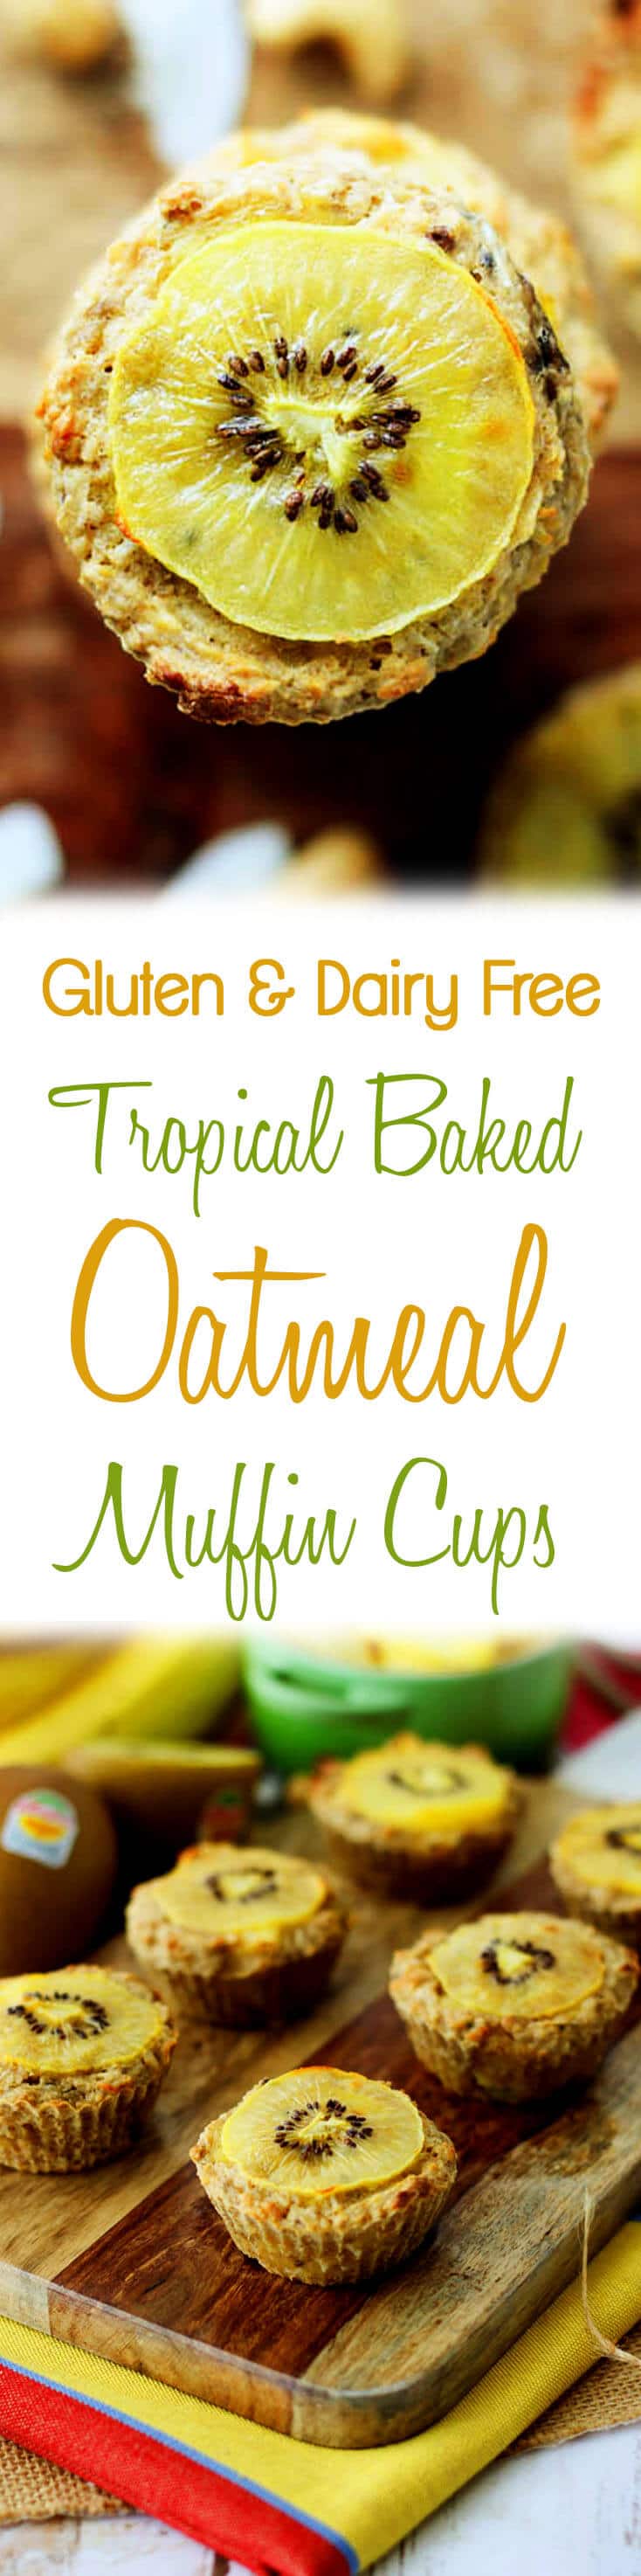 A pinterest image of baked oatmeal muffins with the text overlay \"Gluten & Fairy Free Topical Baked Oatmeal Muffin Cups.\"